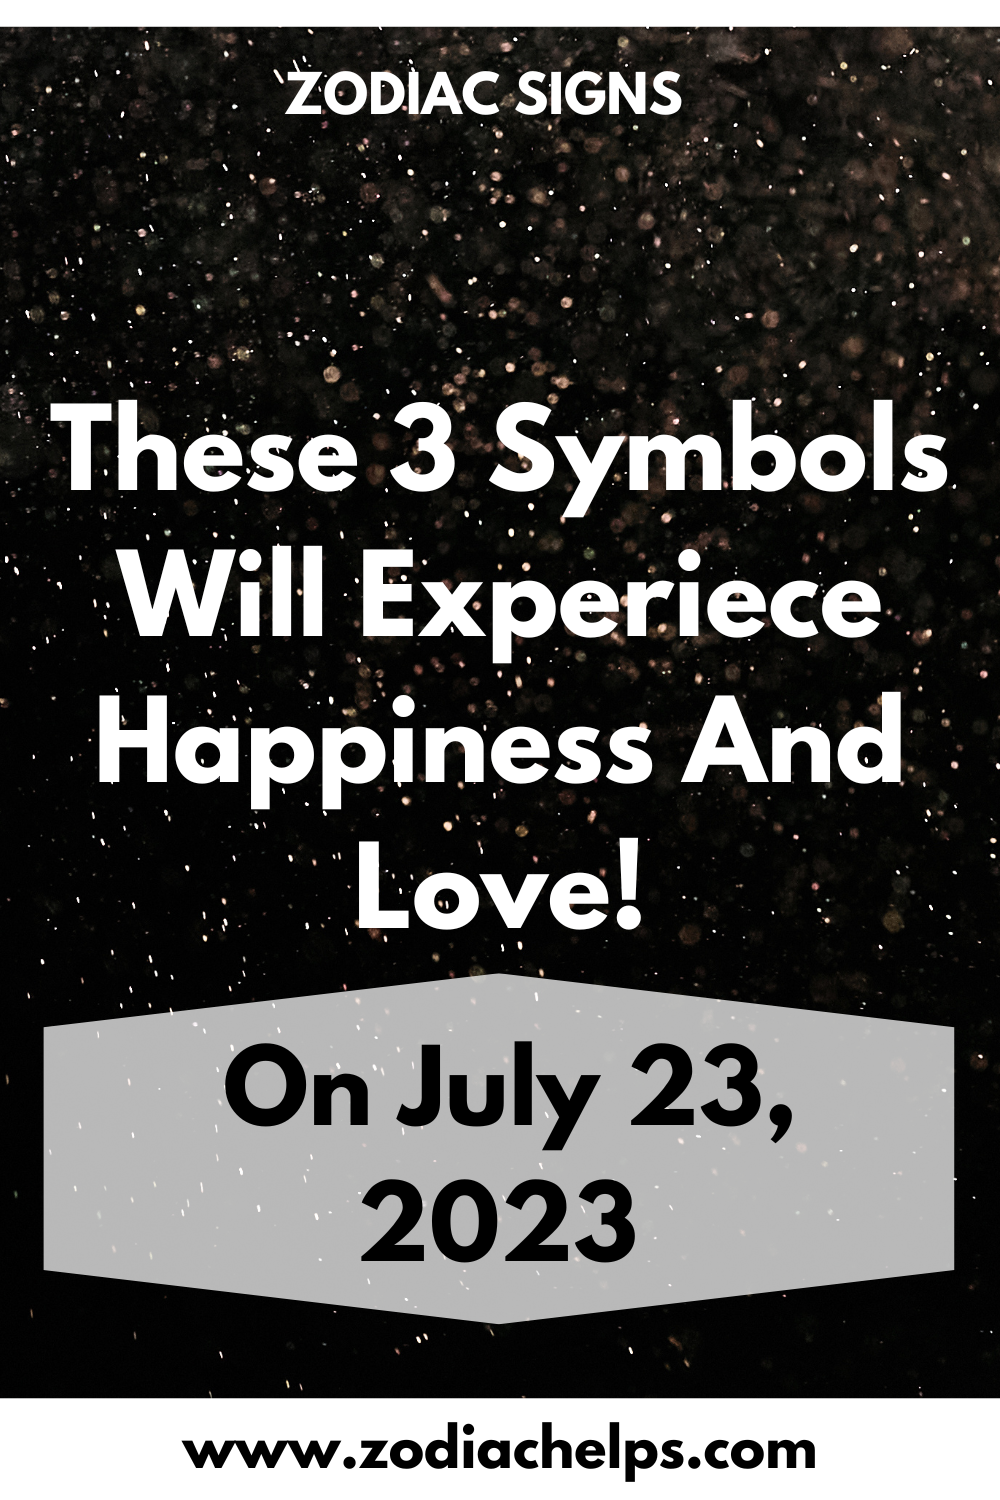 These 3 Symbols Will Experiece Happiness And Love! On July 23, 2023